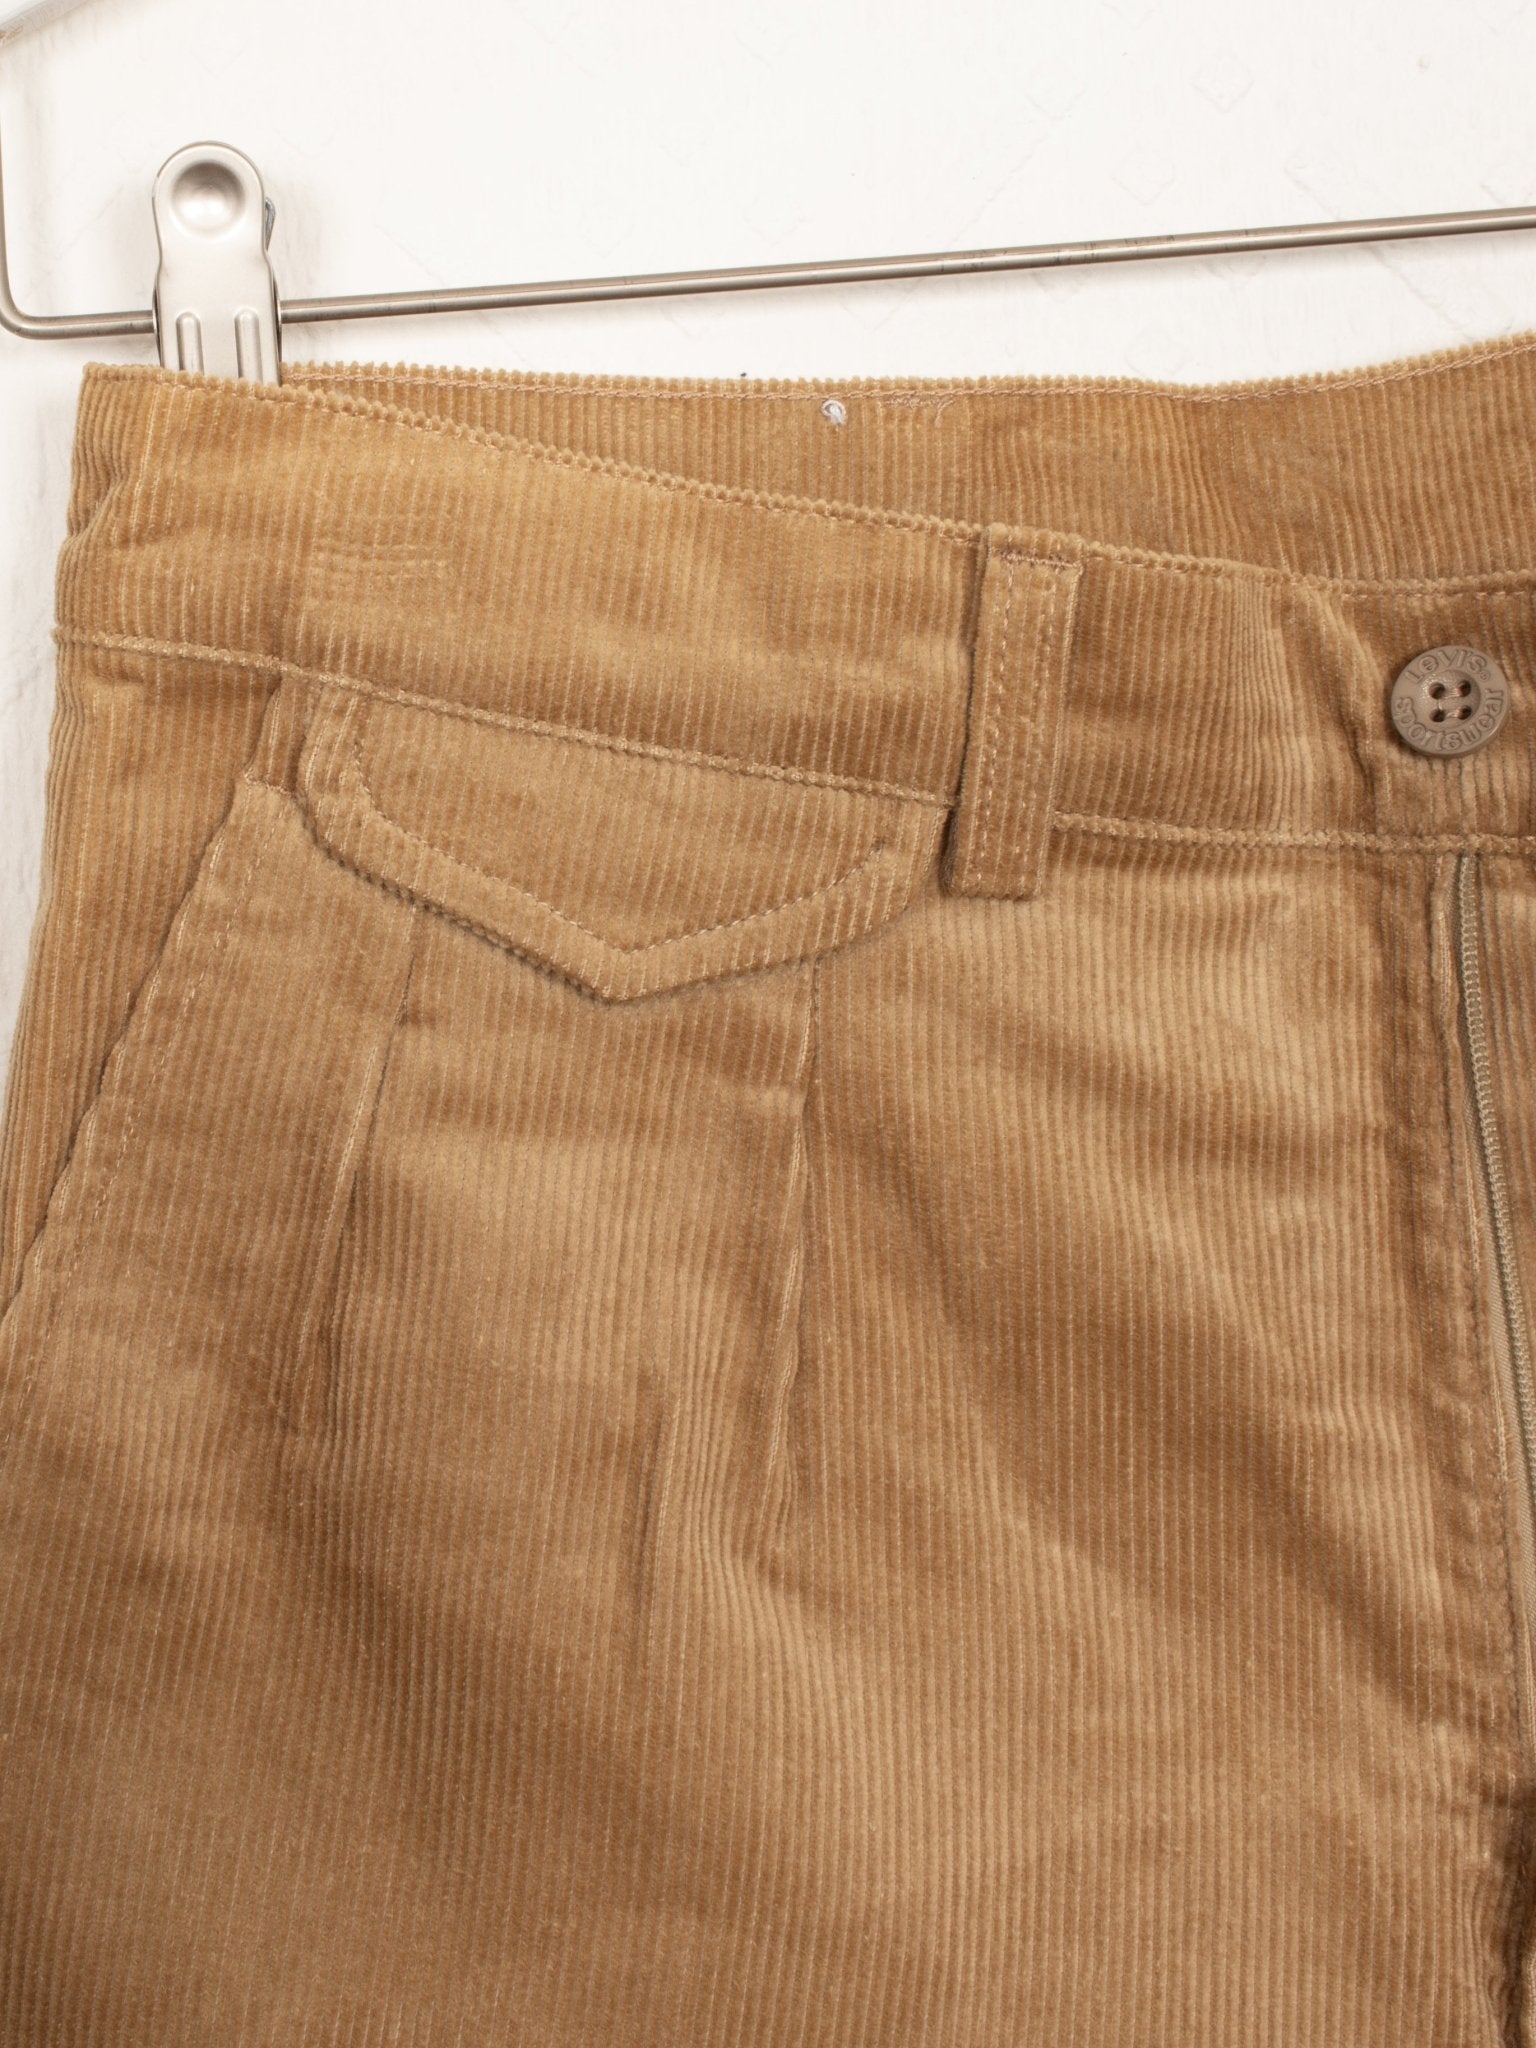 1970s Levi's 203 Chino Trousers